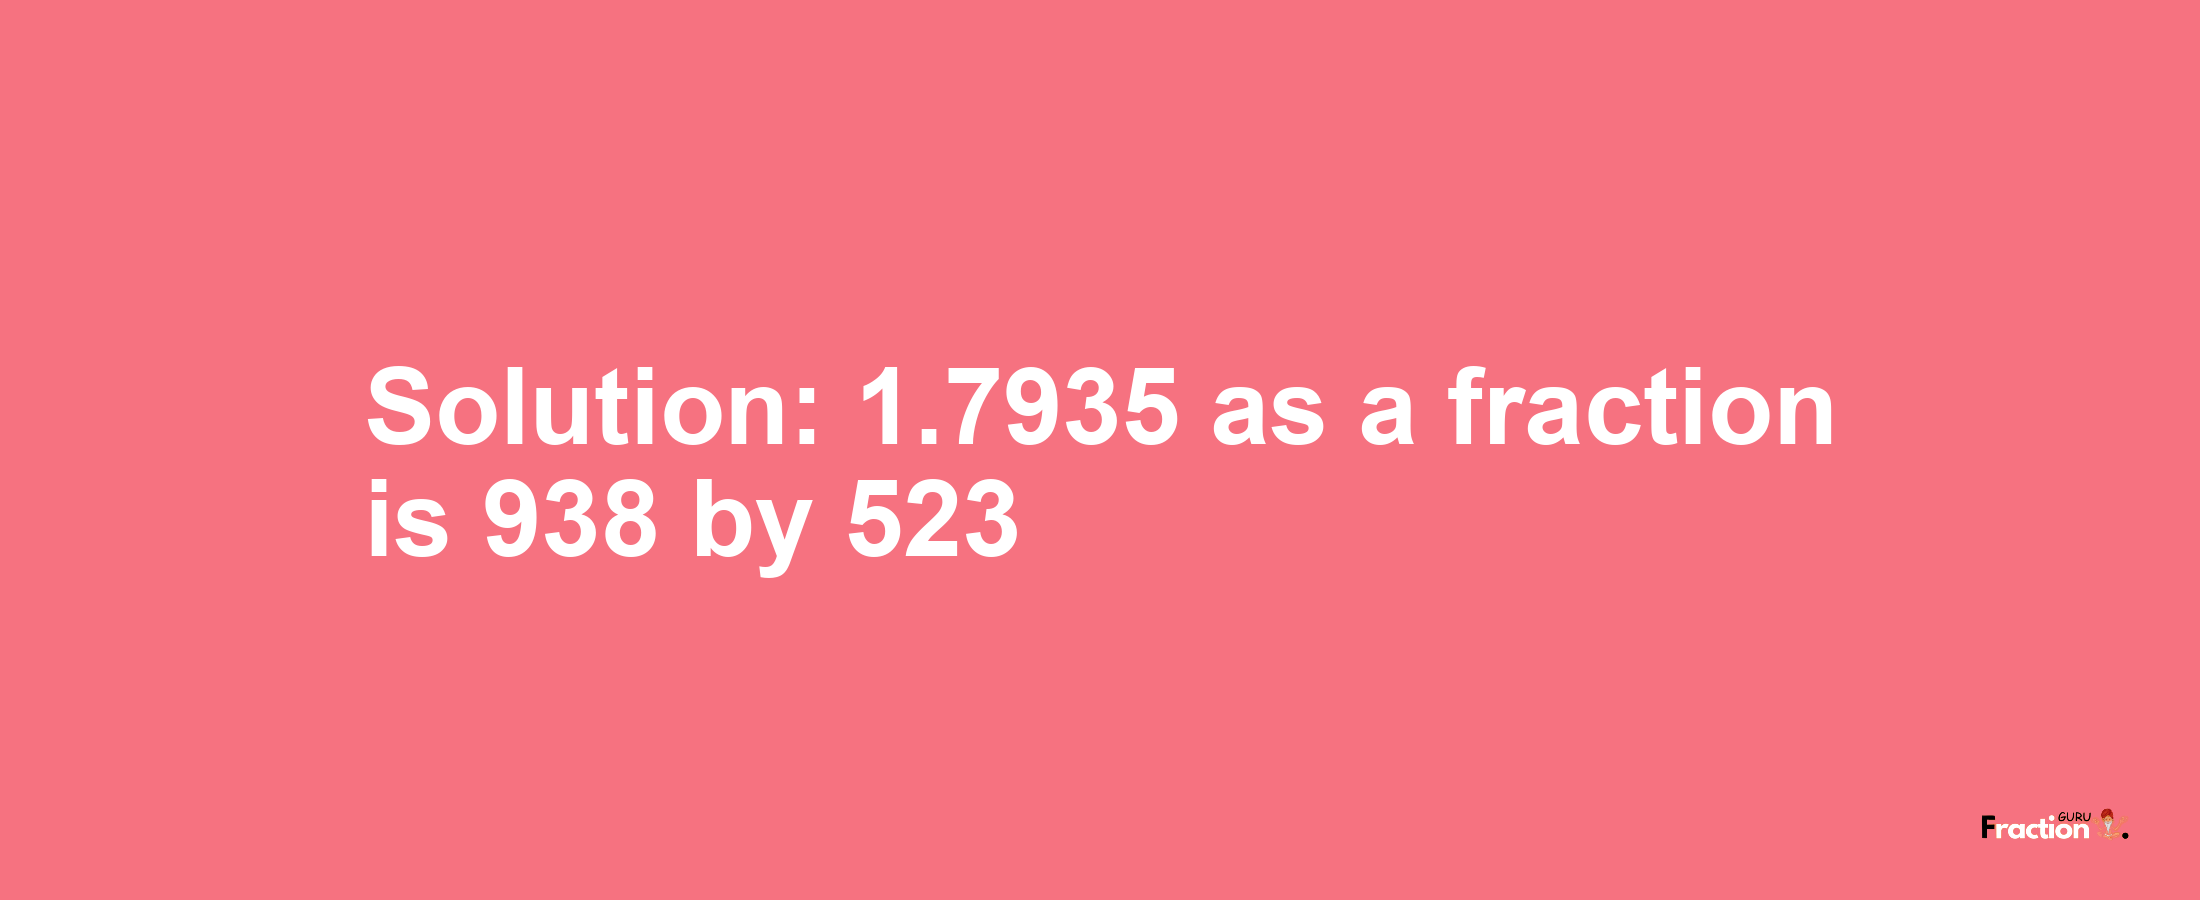 Solution:1.7935 as a fraction is 938/523